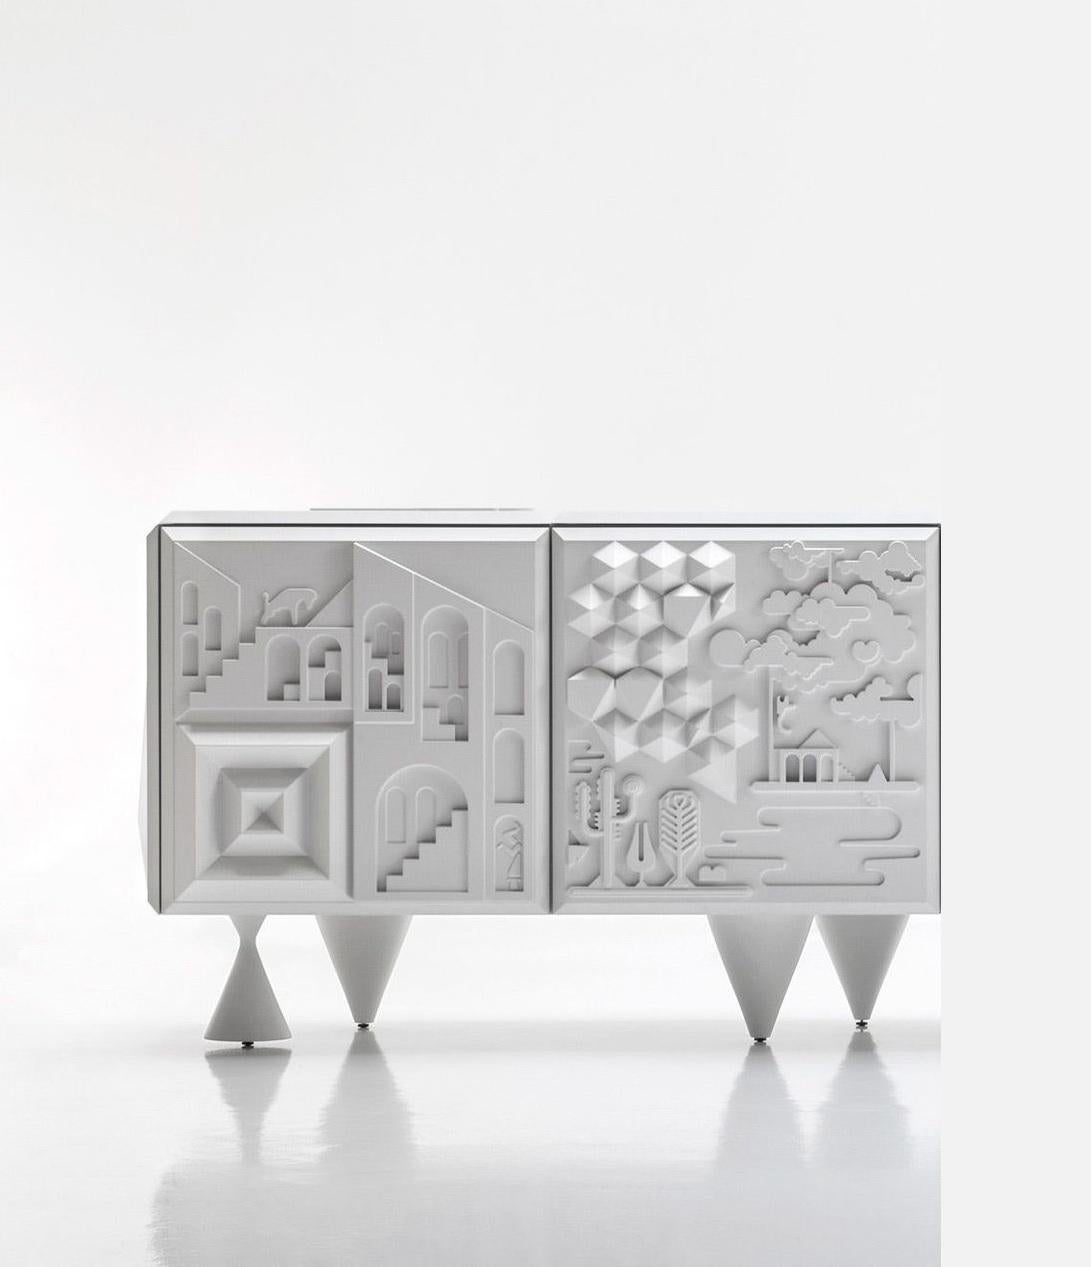 Module 12 Tout va Bien Cabinet by Antoine et Manuel
Dimensions: D 50 x W 130 x H 82 cm 
Materials: Containers manufactured of MDF in a matte lacquered finish, attached together using a mechanical fixing system. Doors made of MDF with mechanized